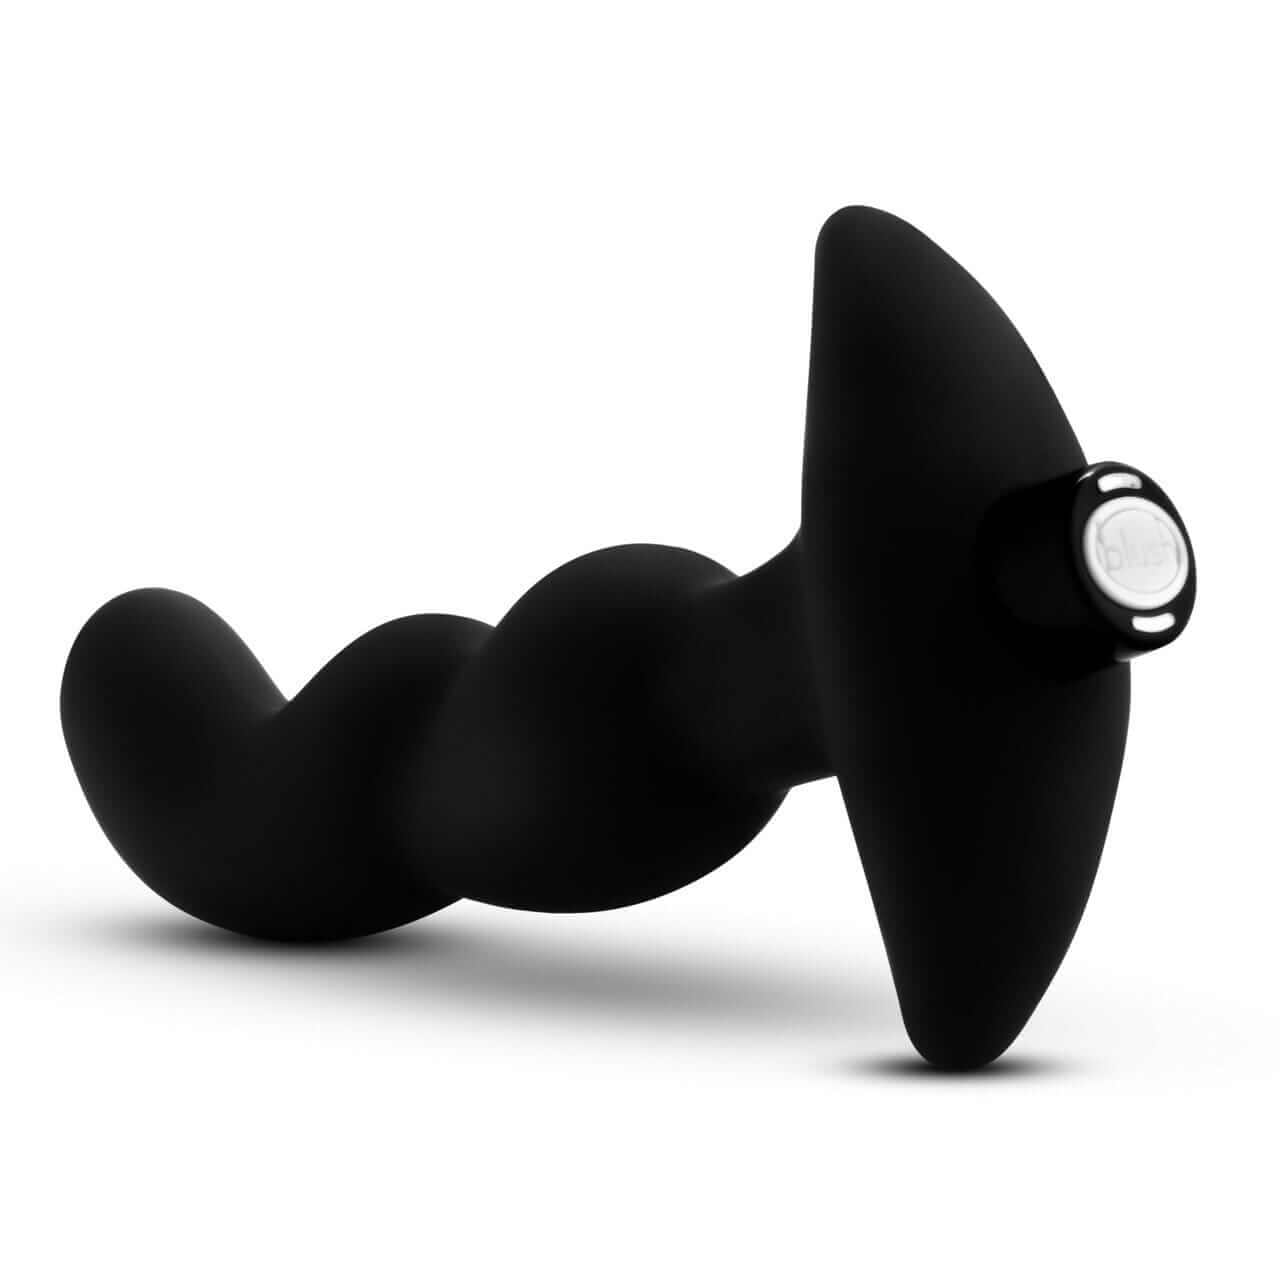 Silicone Vibrating Prostate Massager 03 - Black - Thorn & Feather